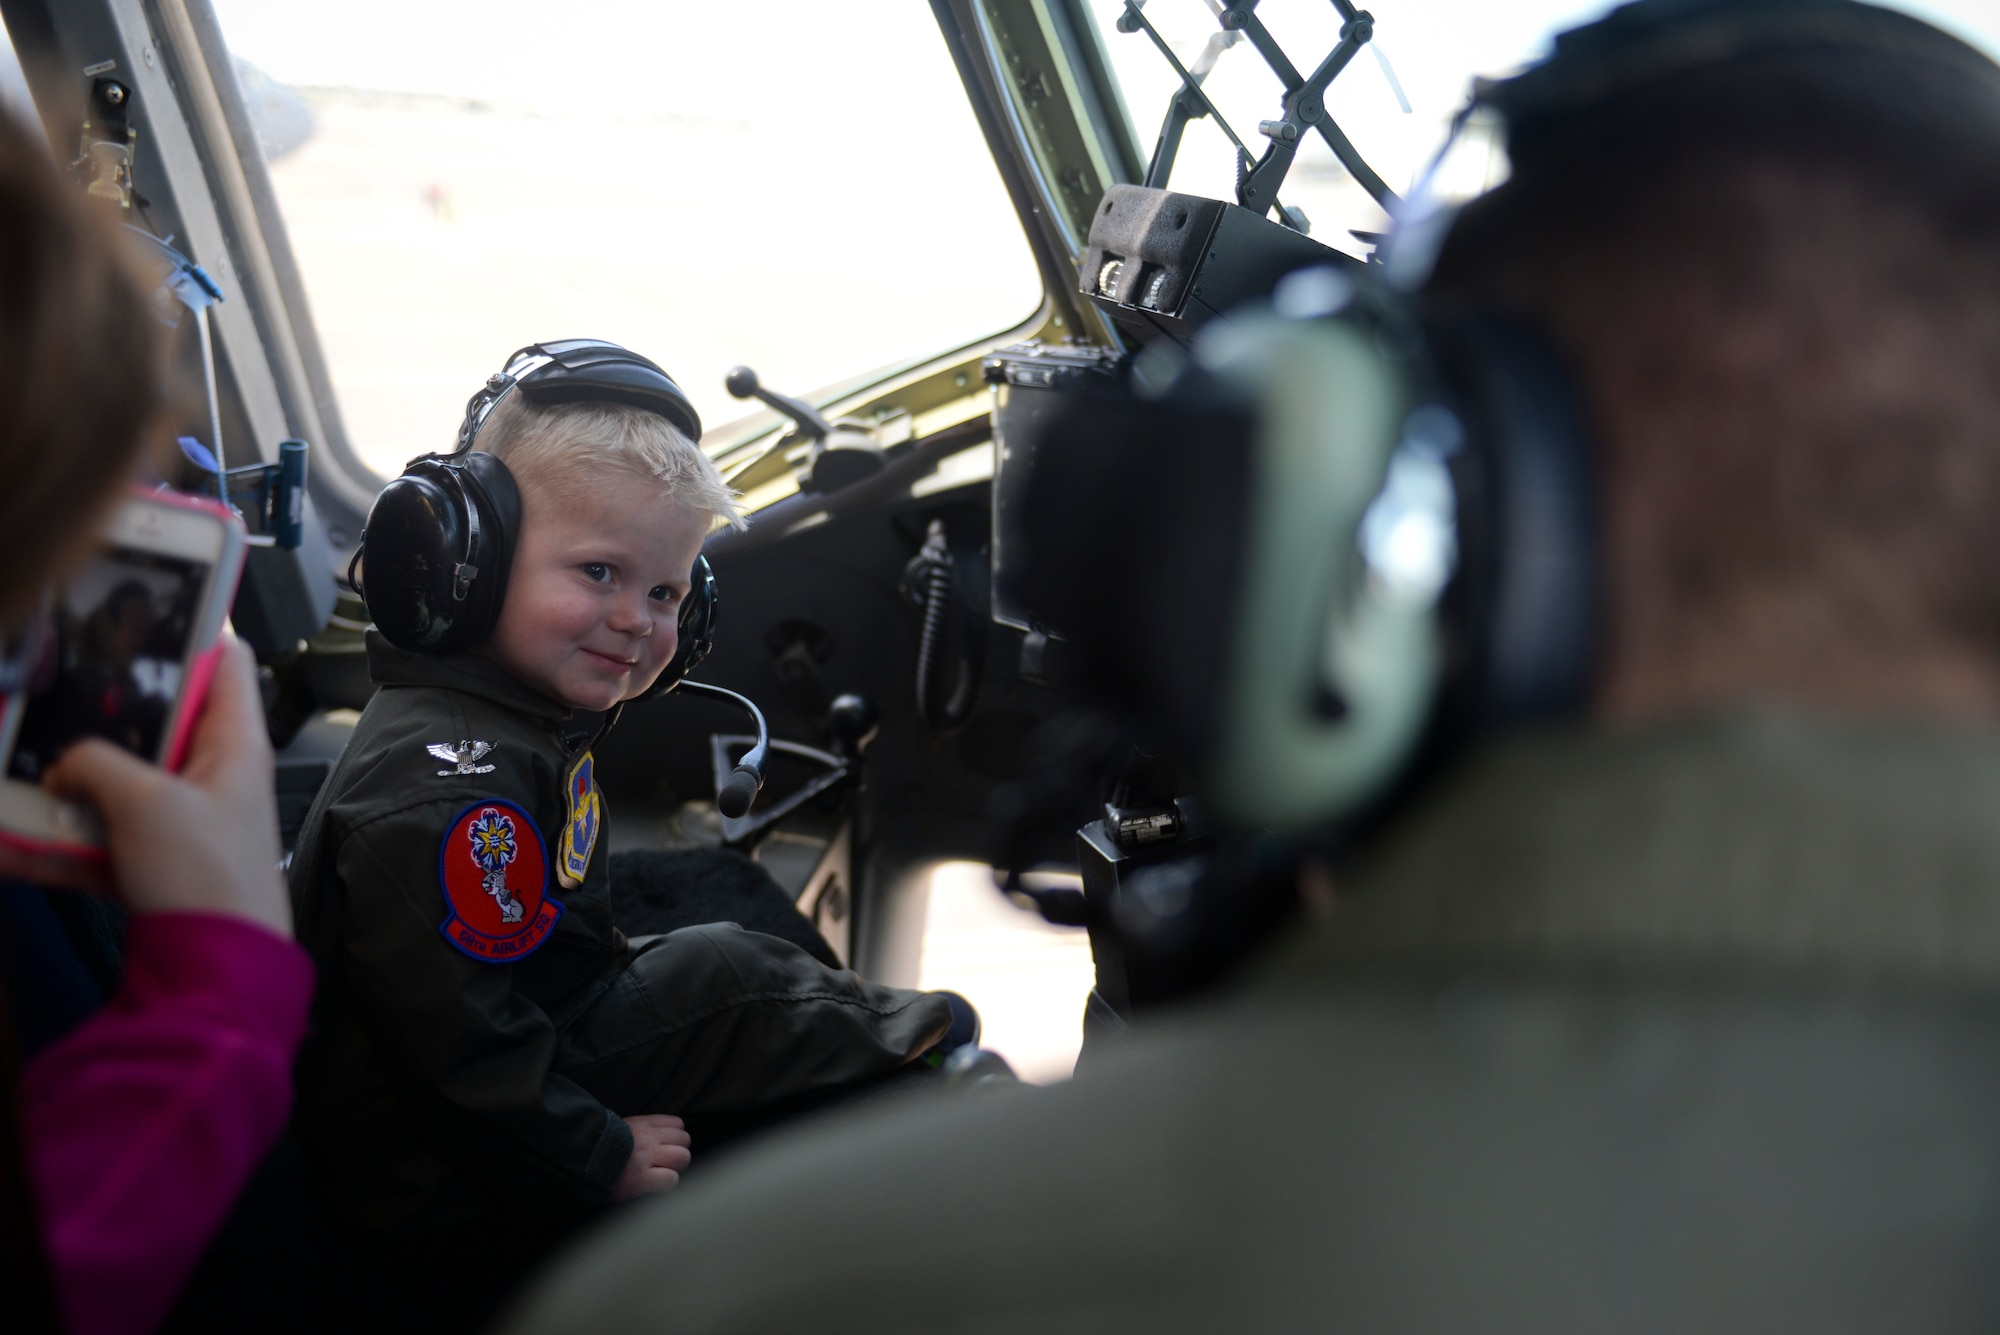 Two-year-old John Austin smiles as he listens to radio traffic inside the cockpit of a C-17 Globemaster III cargo aircraft May 15, 2014, at Altus Air Force Base, Oklahoma. John was diagnosed with acute lymphoblastic leukemia when he was four months old, but has been in remission since December 2011 and finished treatment in October 2013. (U.S. Air Force photo/Staff Sgt. Nathanael Callon)